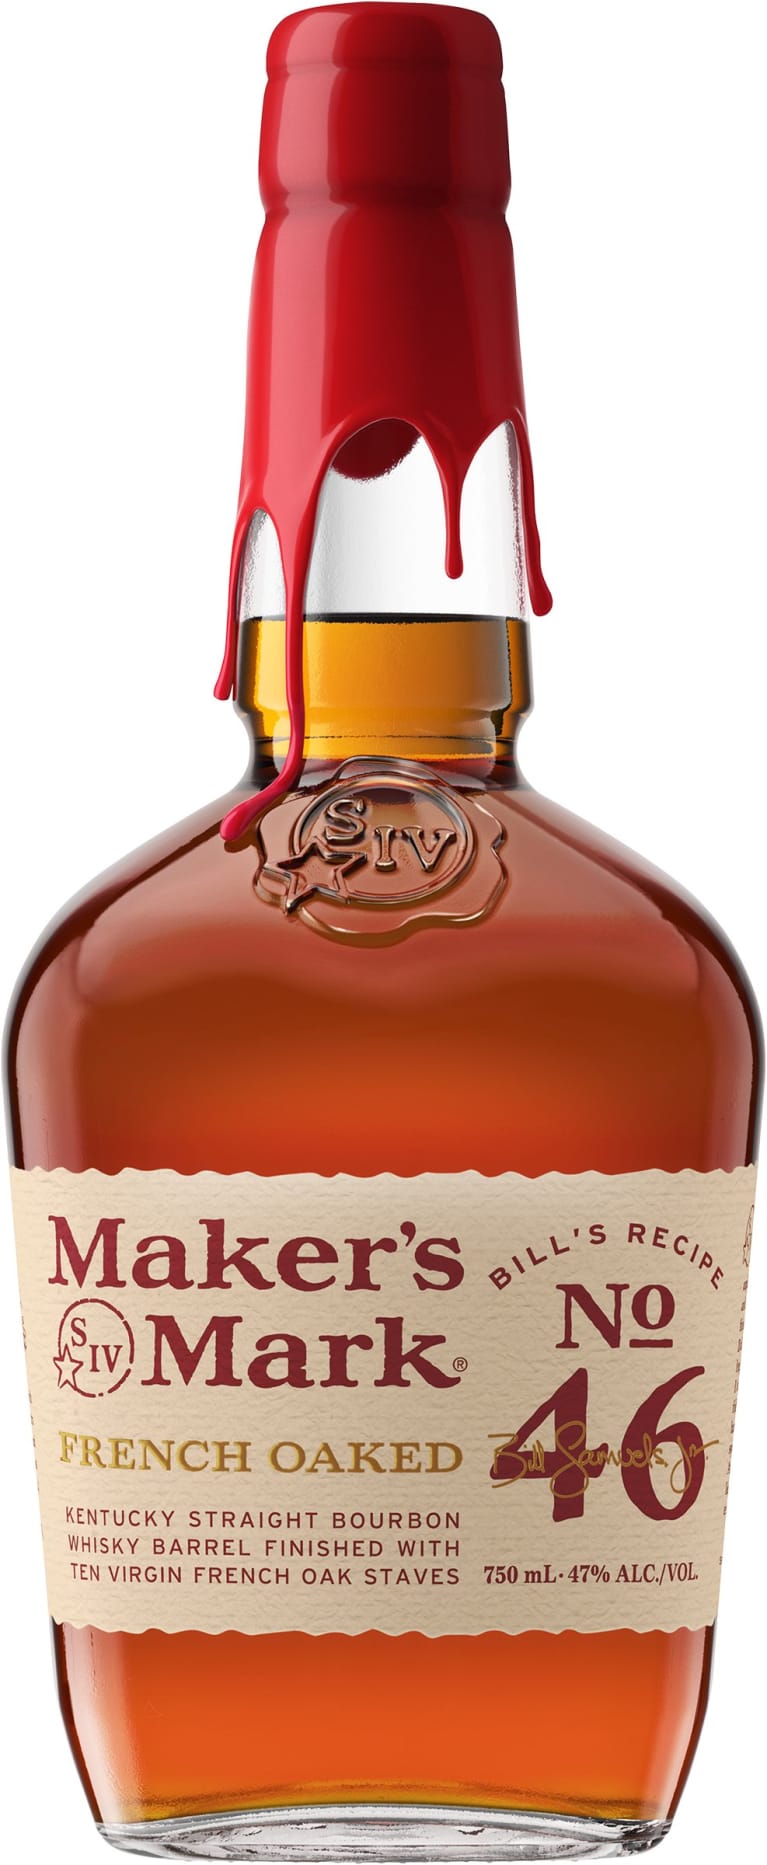 Makers Mark